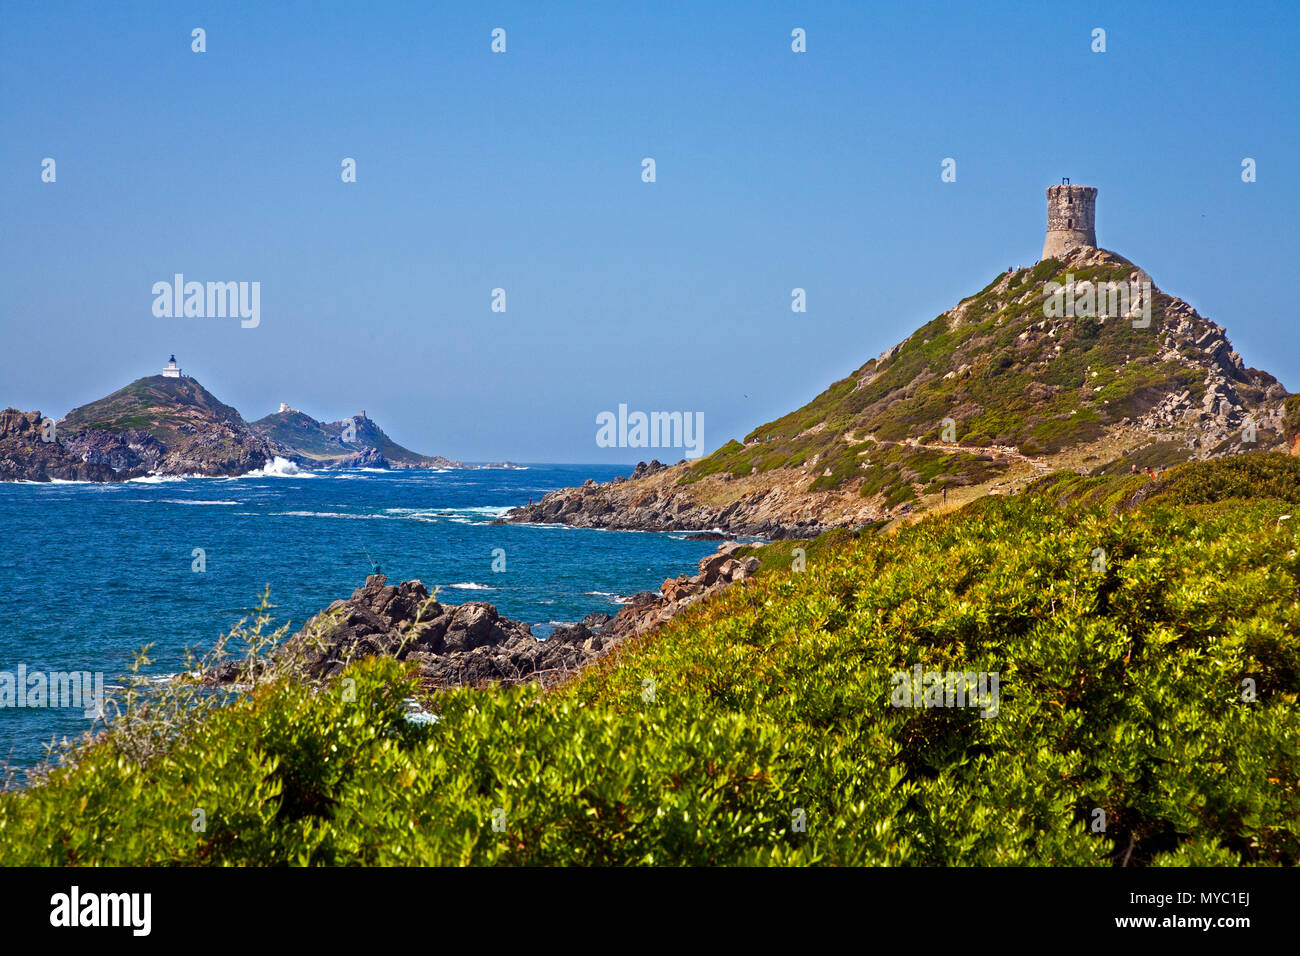 May 16, 2016- Corsica, Spain: watch towers sit on top of hills by the ocean Stock Photo